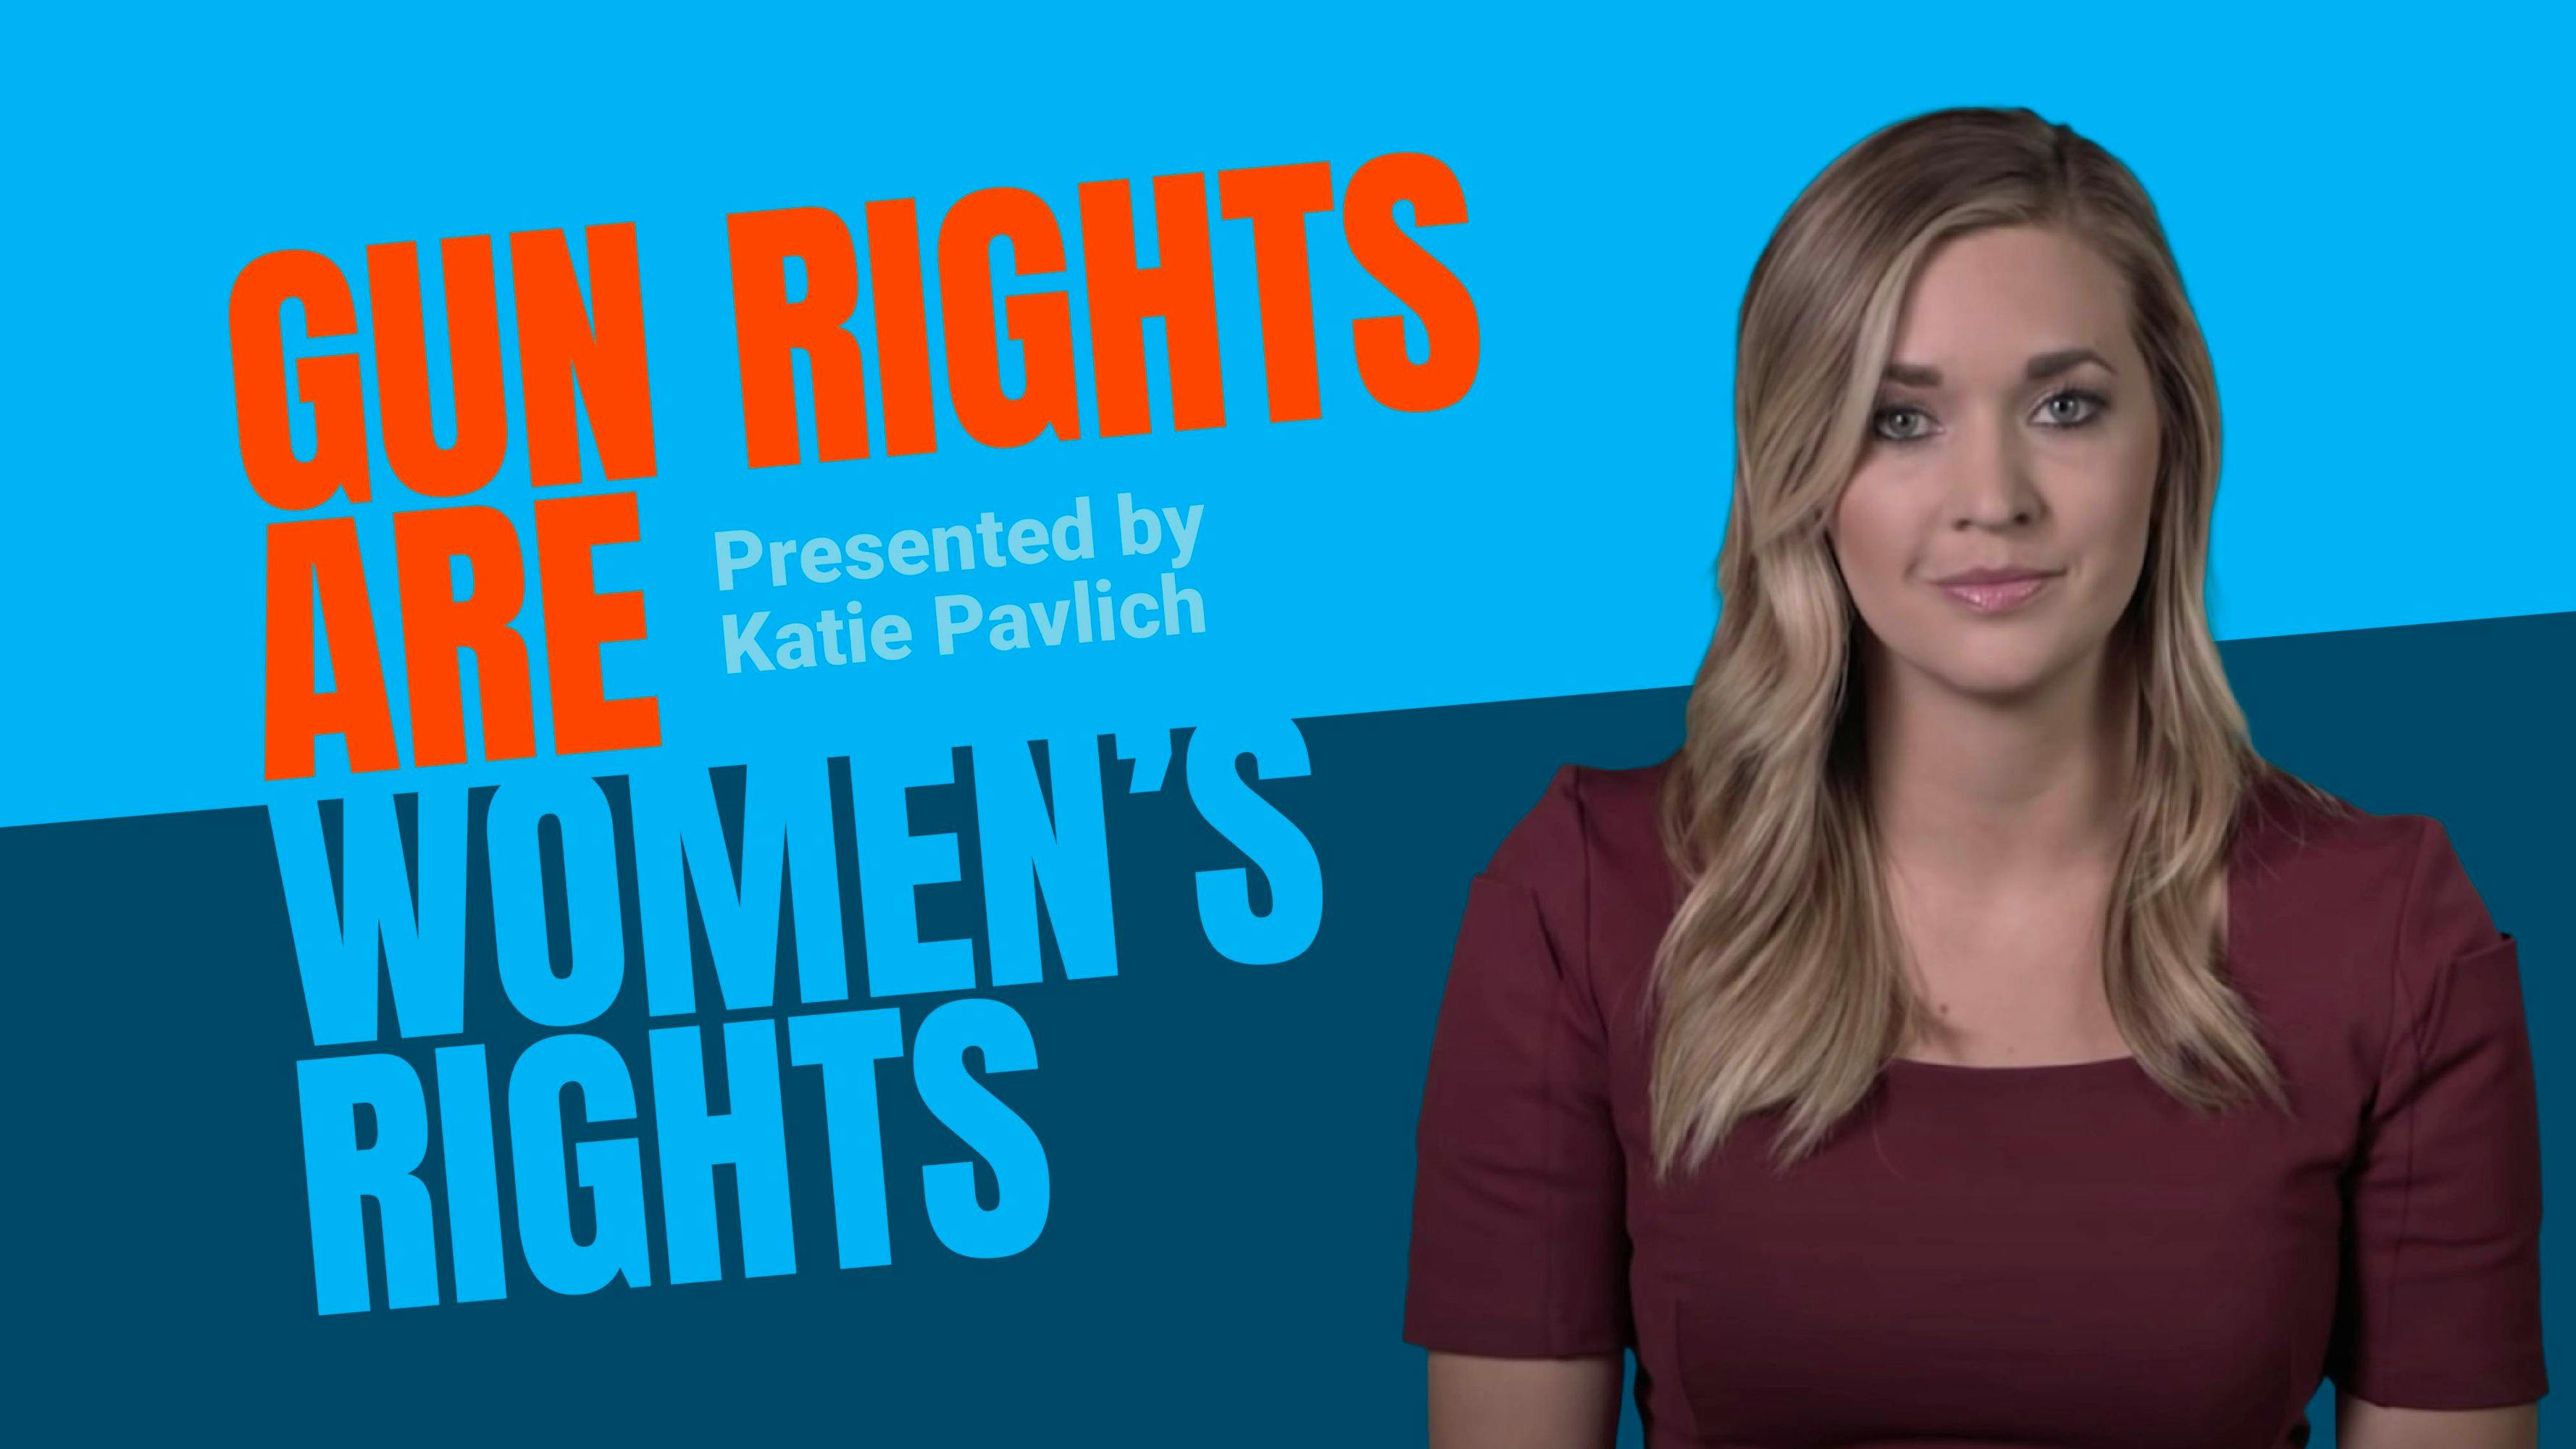 Gun Rights Are Women's Rights